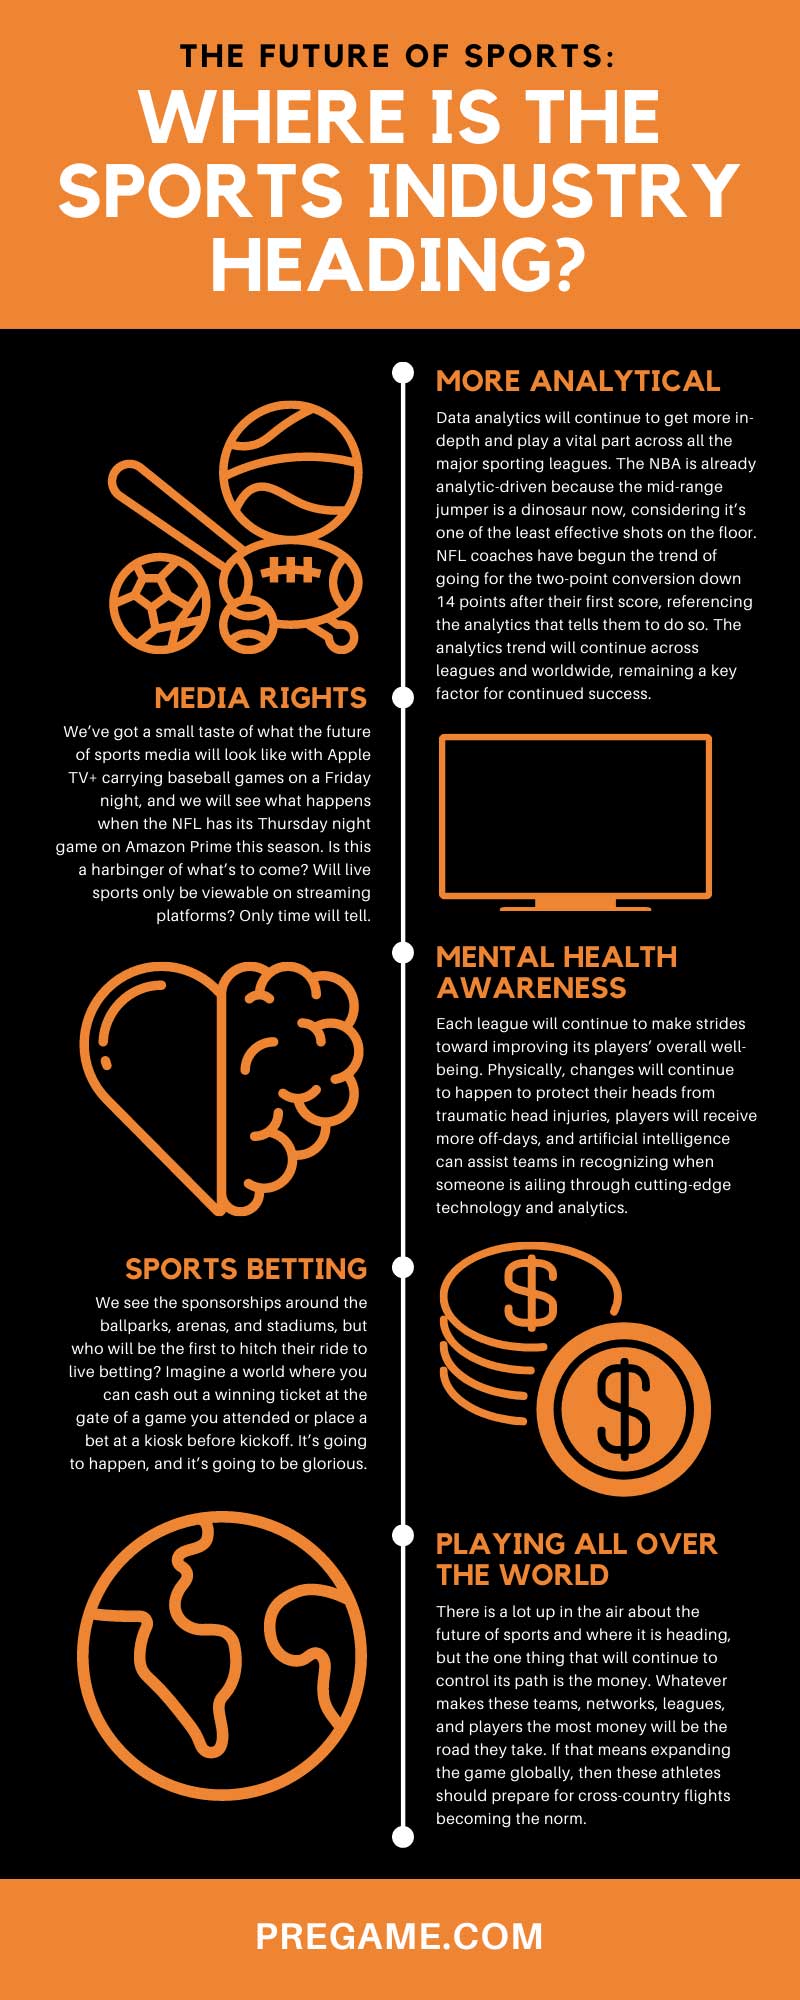 The Future of Sports: Where Is the Sports Industry Heading?